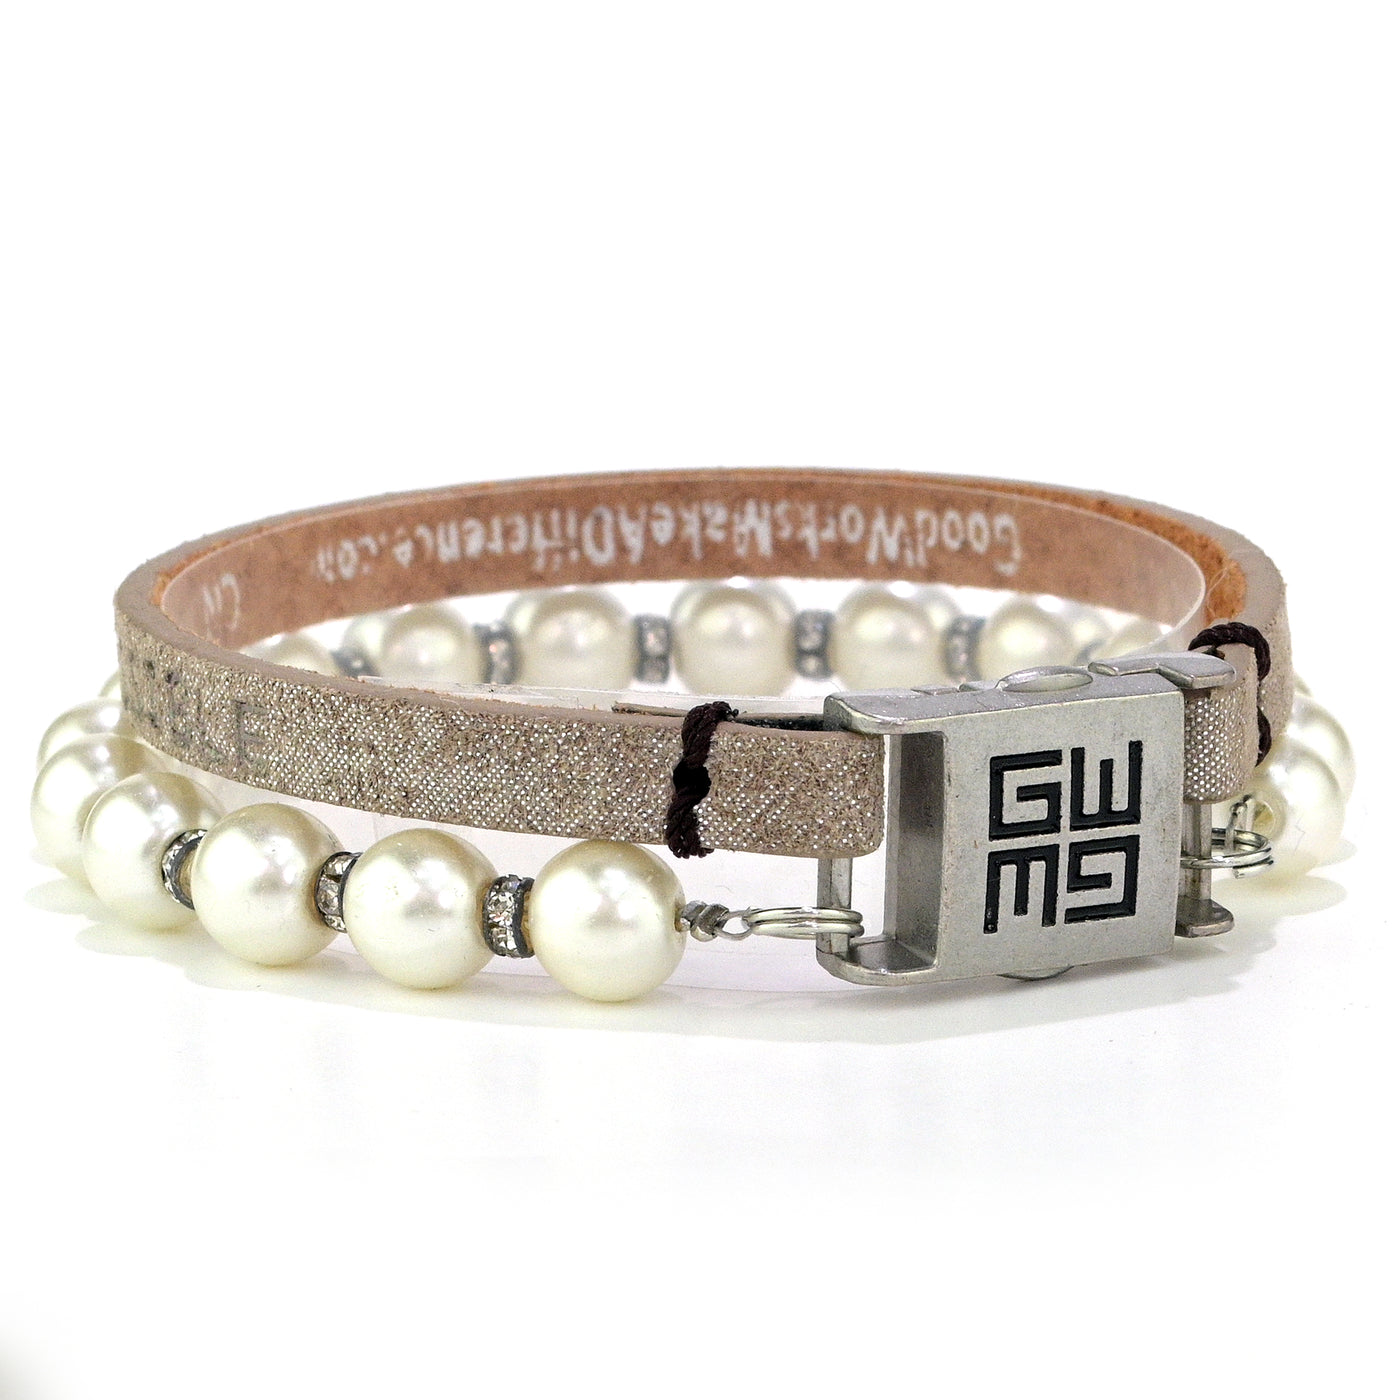 Spirit Single Bracelet-Good Work(s) Make A Difference® | Christian and Inspirational Jewelry Company in Vernon, California